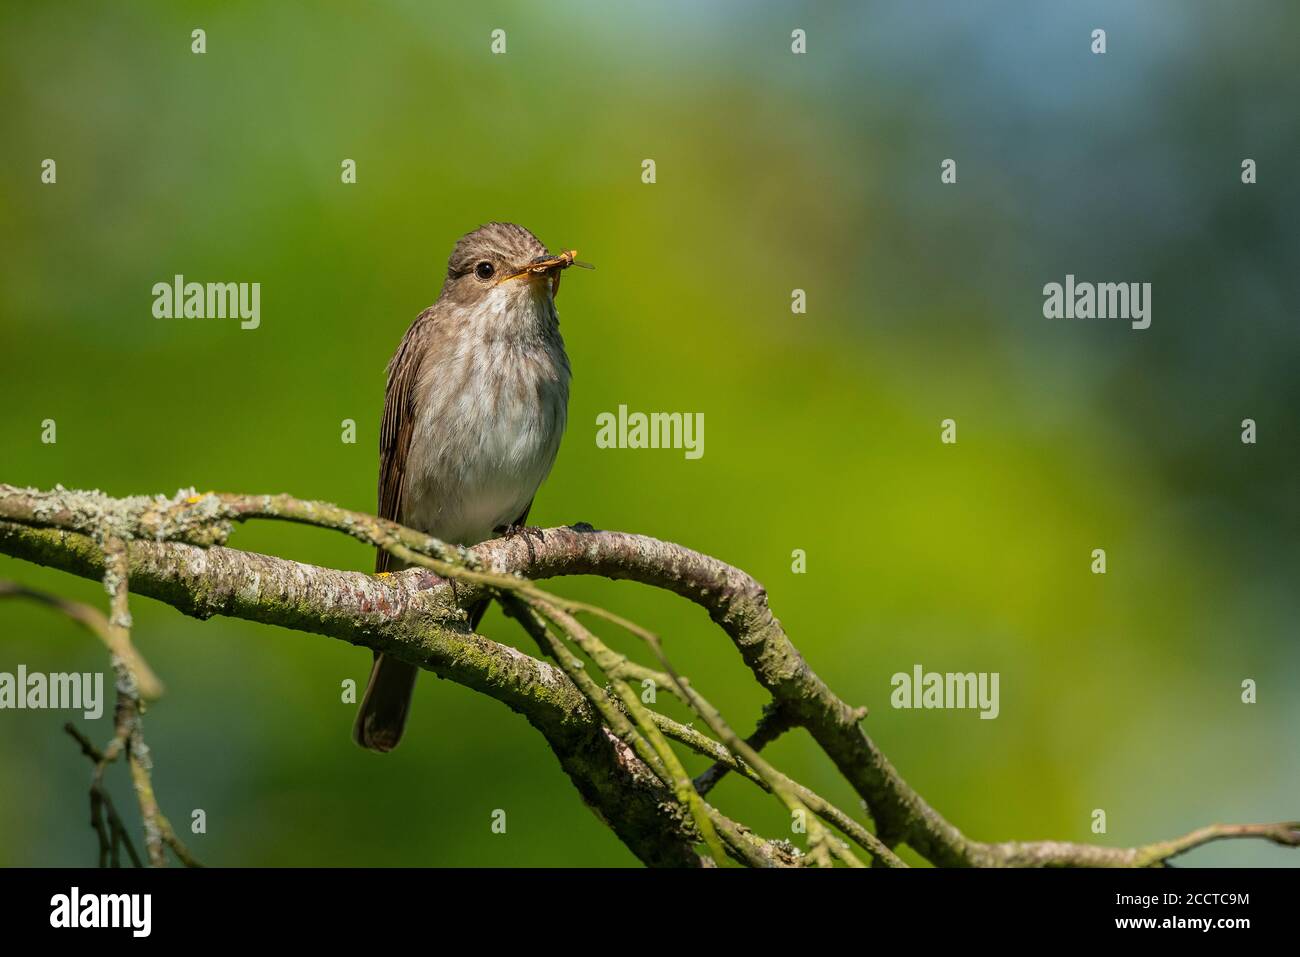 Spotted flycatcher, Muscicapa striata, with male Vapourer moth prey in beak. Stock Photo